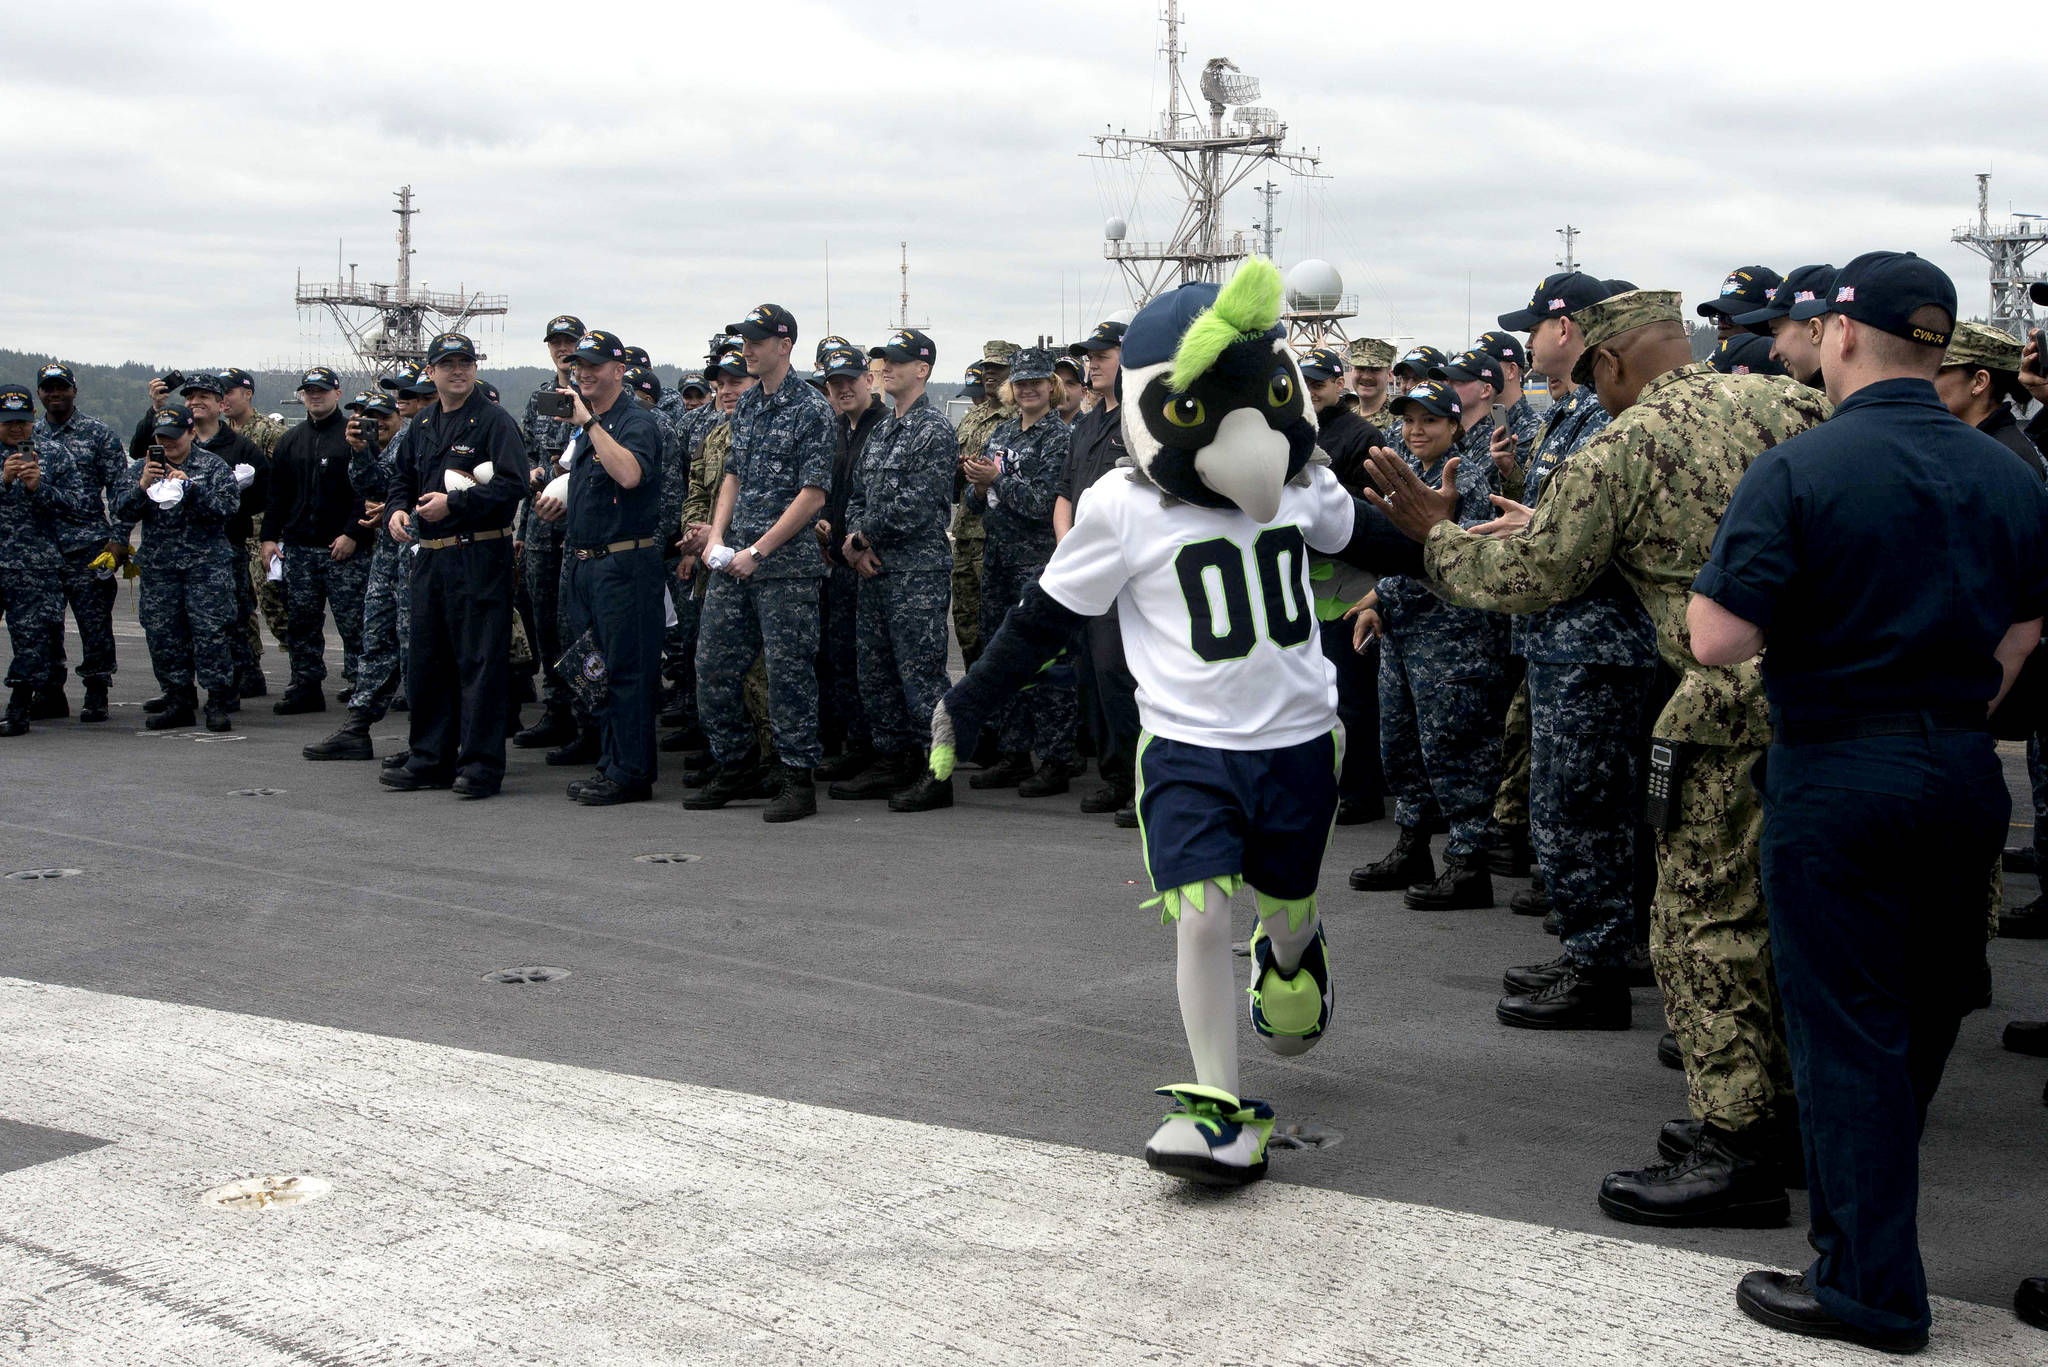 The Seattle Seahawks football team mascot, Boom, greets Sailors aboard the aircraft carrier USS John C. Stennis (CVN 74). Stennis is pier-side after returning to homeport after the completion of a seven-week underway where the ship’s crew completed TSTA/FEP early and Carrier Strike Group 3 Group Sail in preparation for its next scheduled deployment.                                Mass Communication Specialist Seaman Isabel Birchard / U.S. Navy